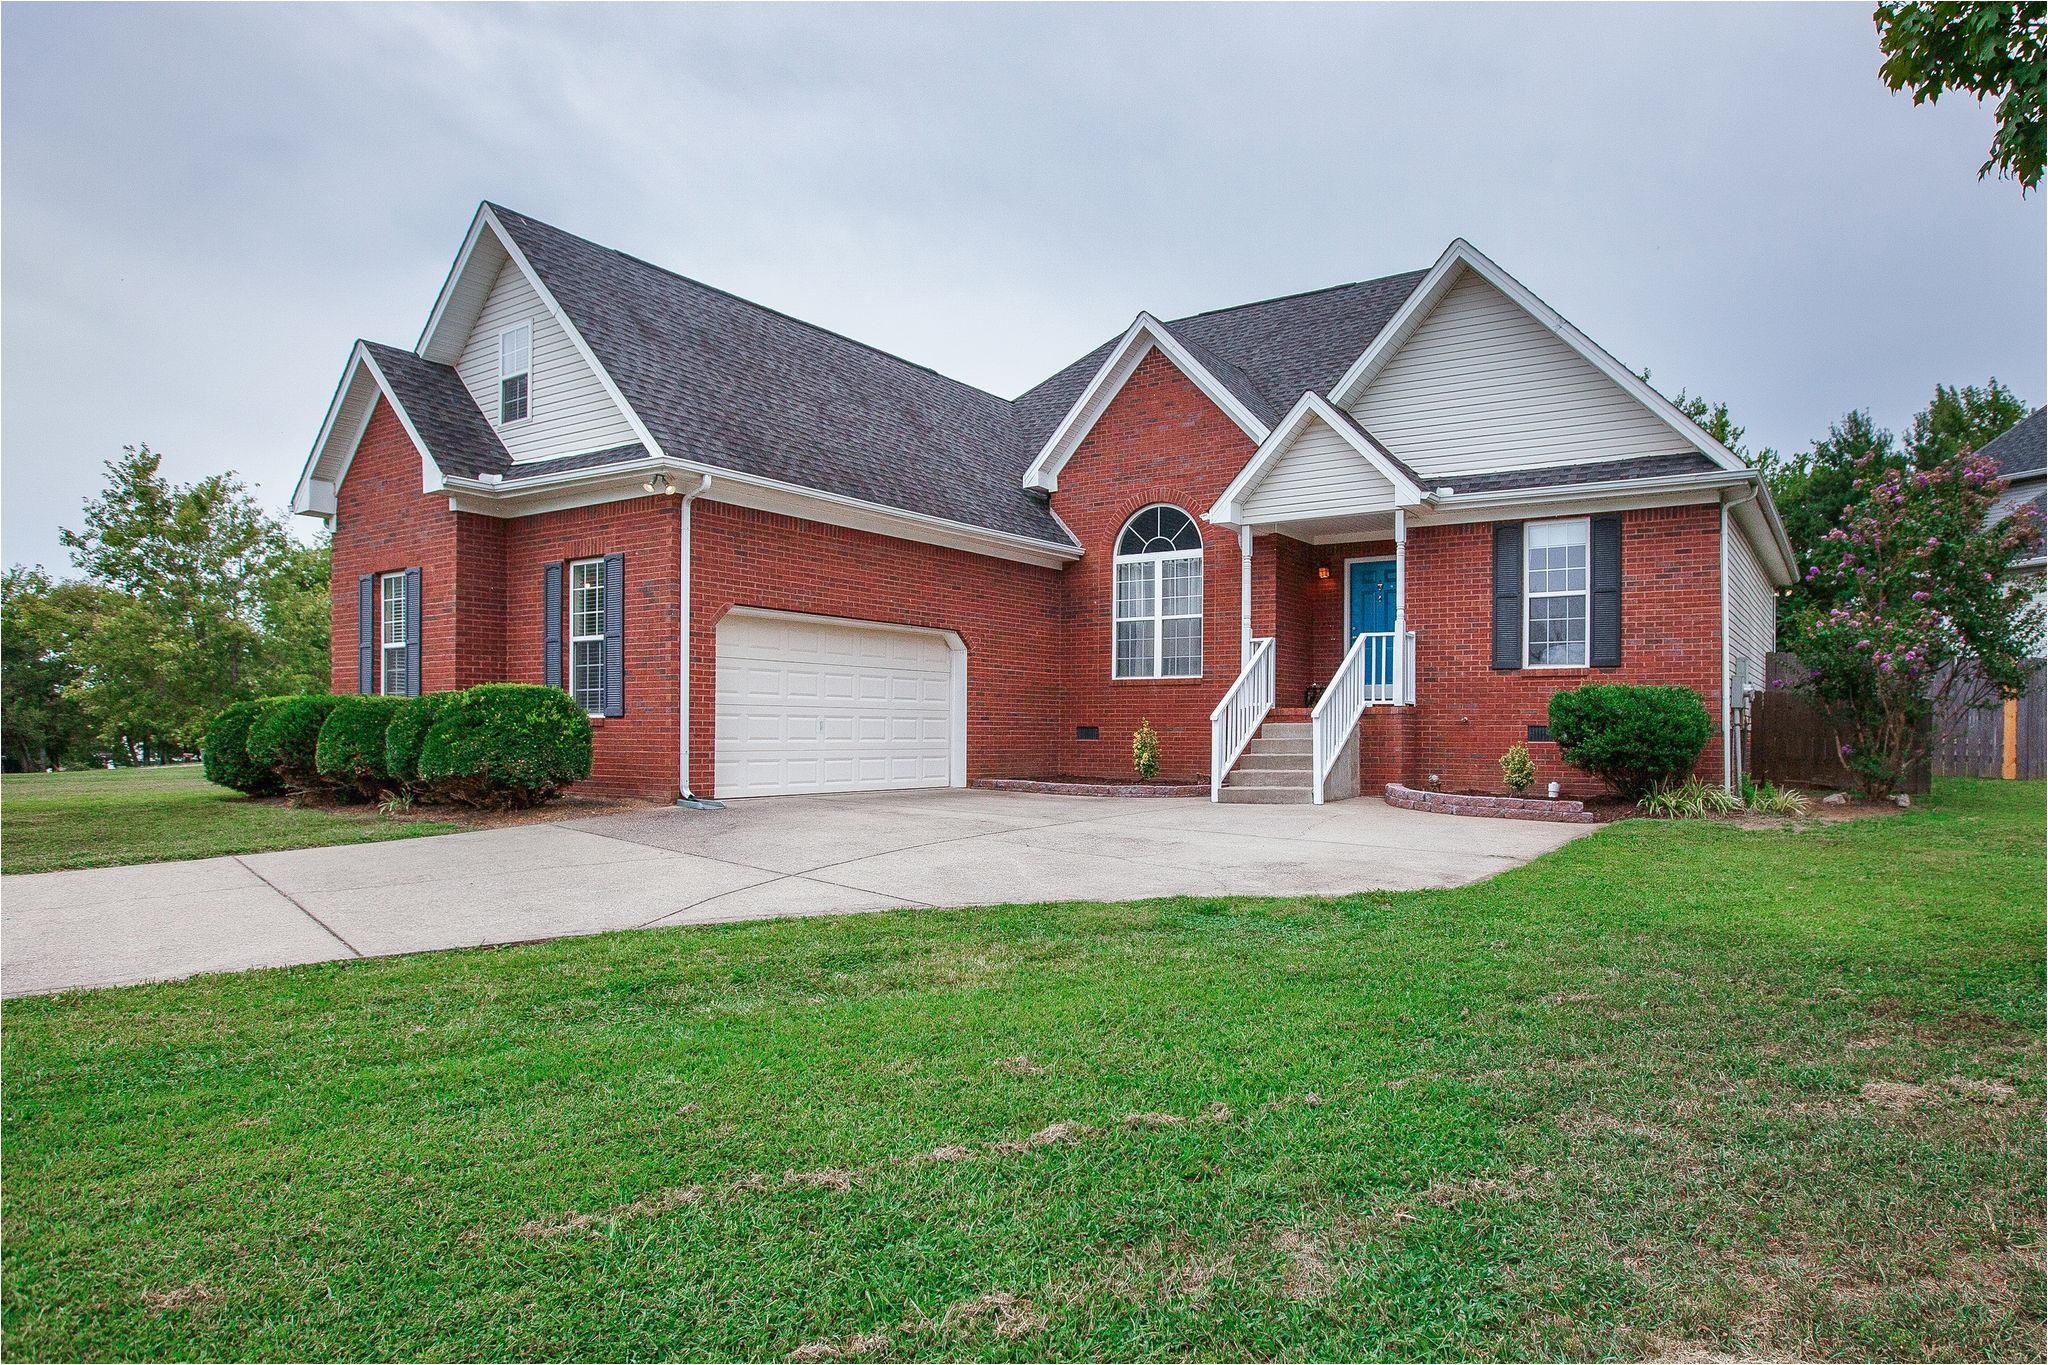 289900 1800 portview dr spring hill tn 37174 pending sale no showings